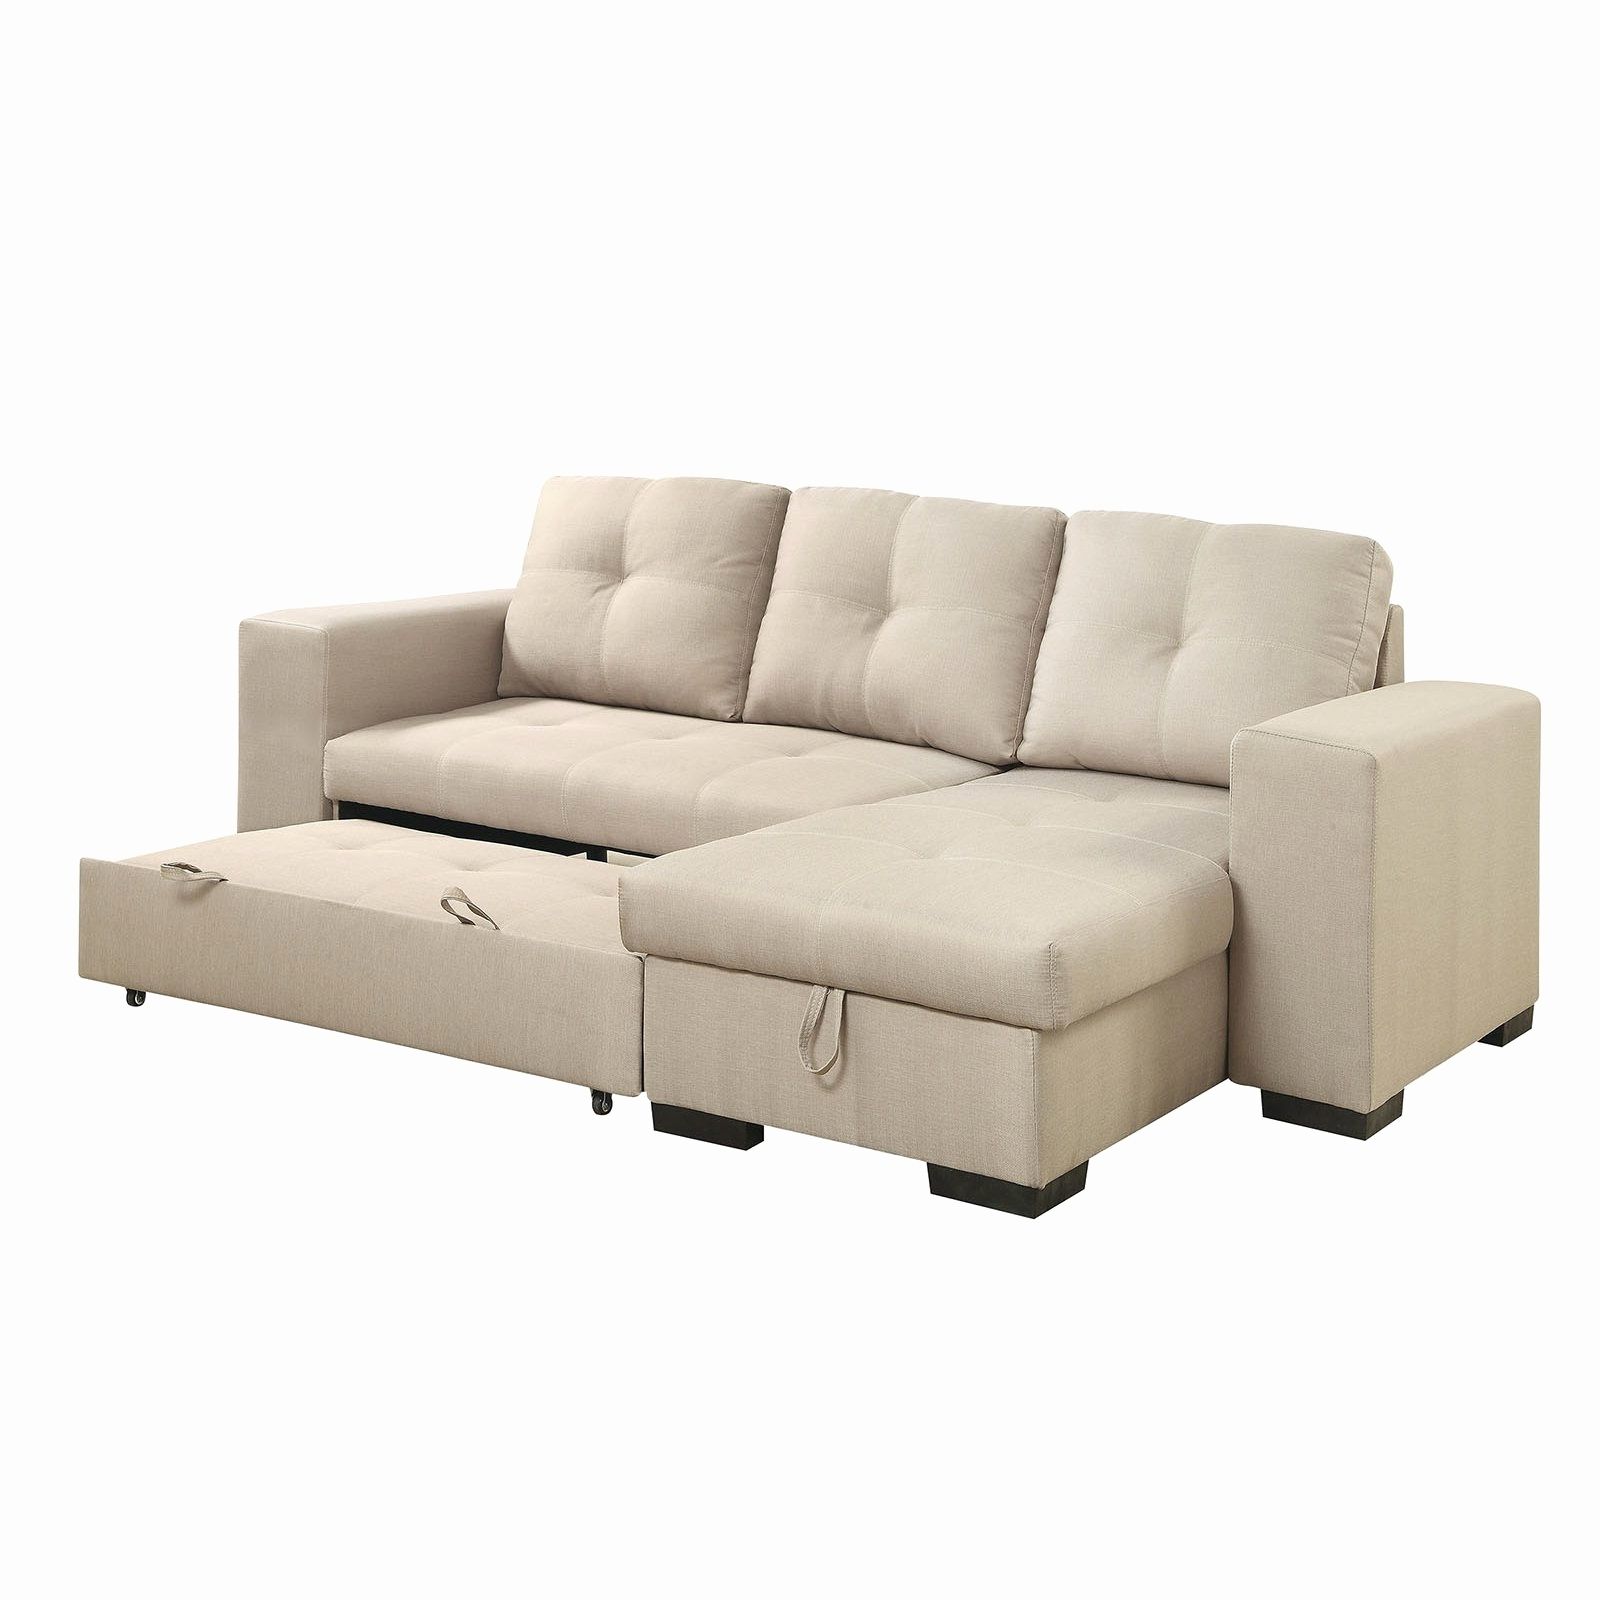 Widely Used Sofa : Leather Sleeper Sofa With Chaise Best Of Chaise Lounge Inside Chaise Lounge Sleepers (View 10 of 15)